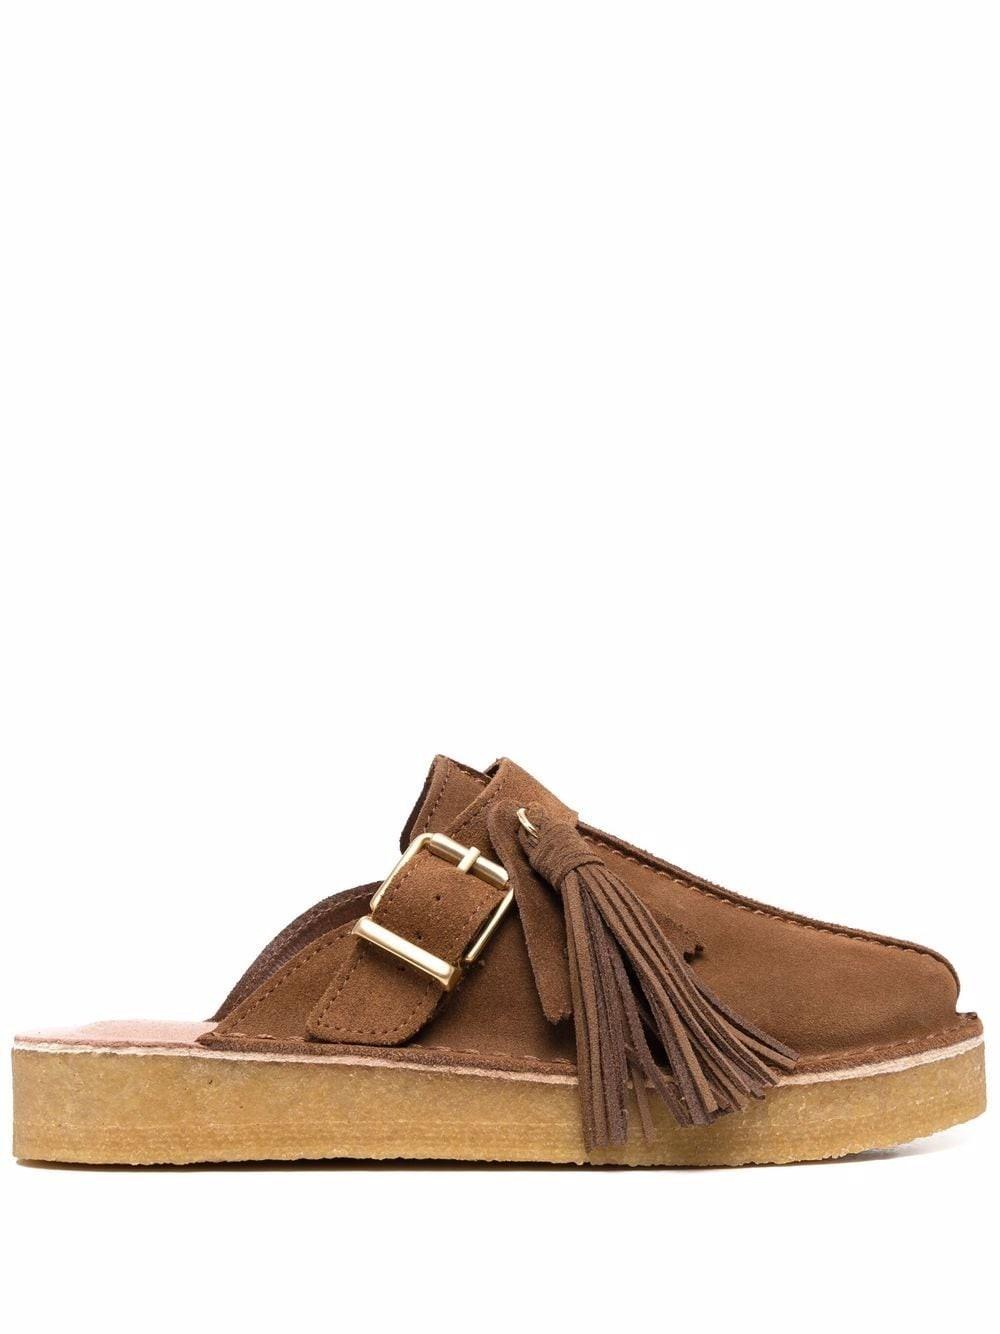 Clarks Sandals Shoes in Brown Lyst